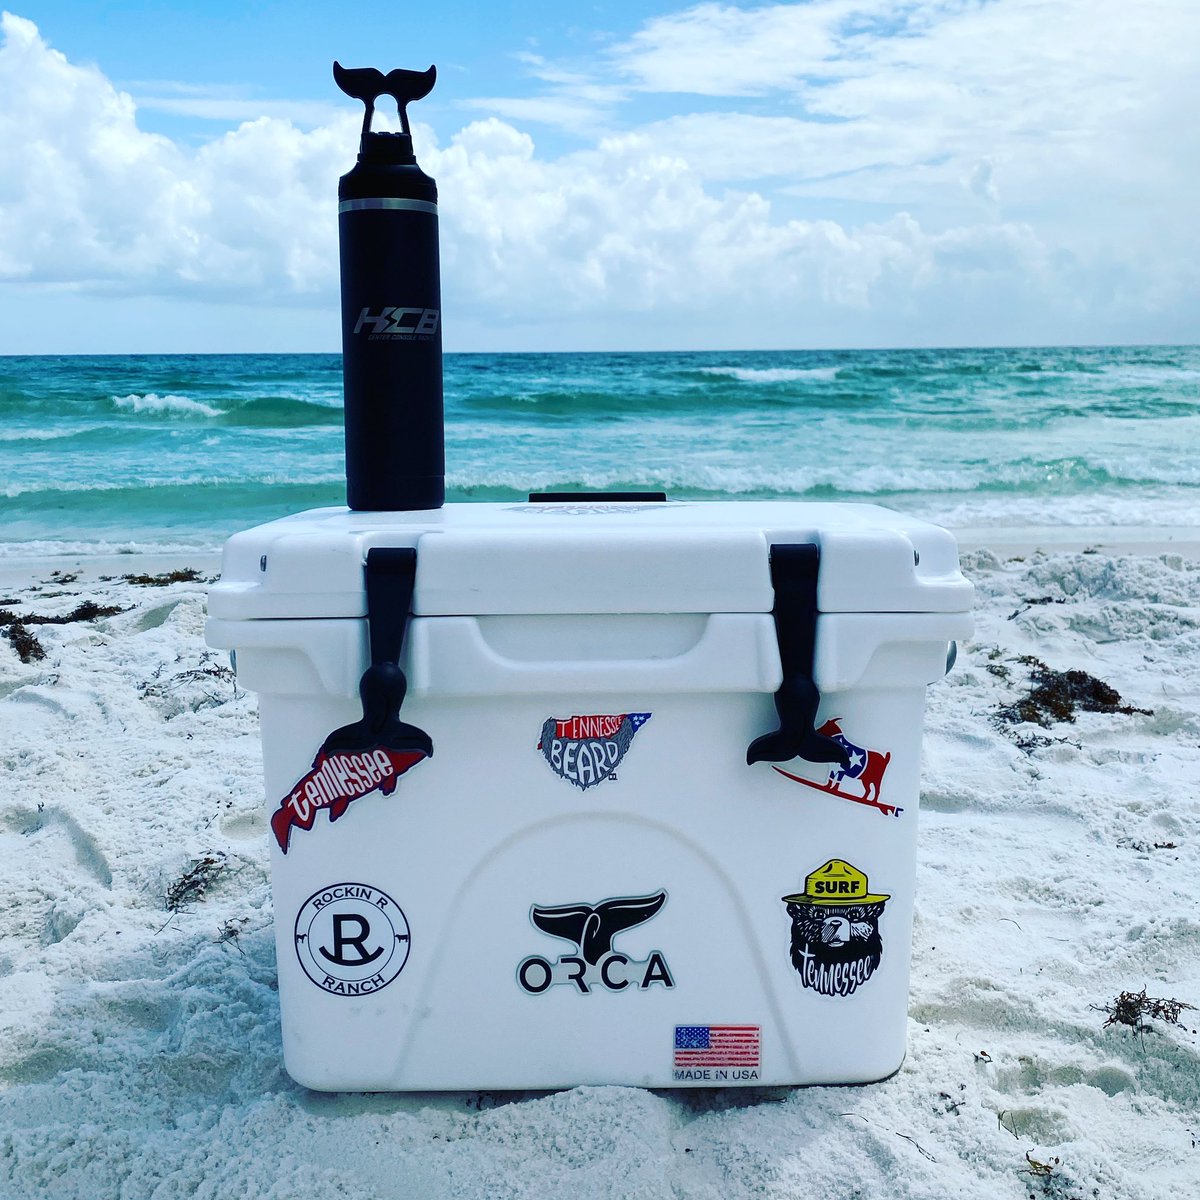 My Orca cooler and hydra bottle are working great at the beach! I sure could get use to this view!! #orcacoolers #tennessee #tennesseelife #tennesseewhiskey #tennesseeriver #tennesseeinstagram #igtennessee #hike #camp #getoutside #cooler #orca #waletail @orcacoolers